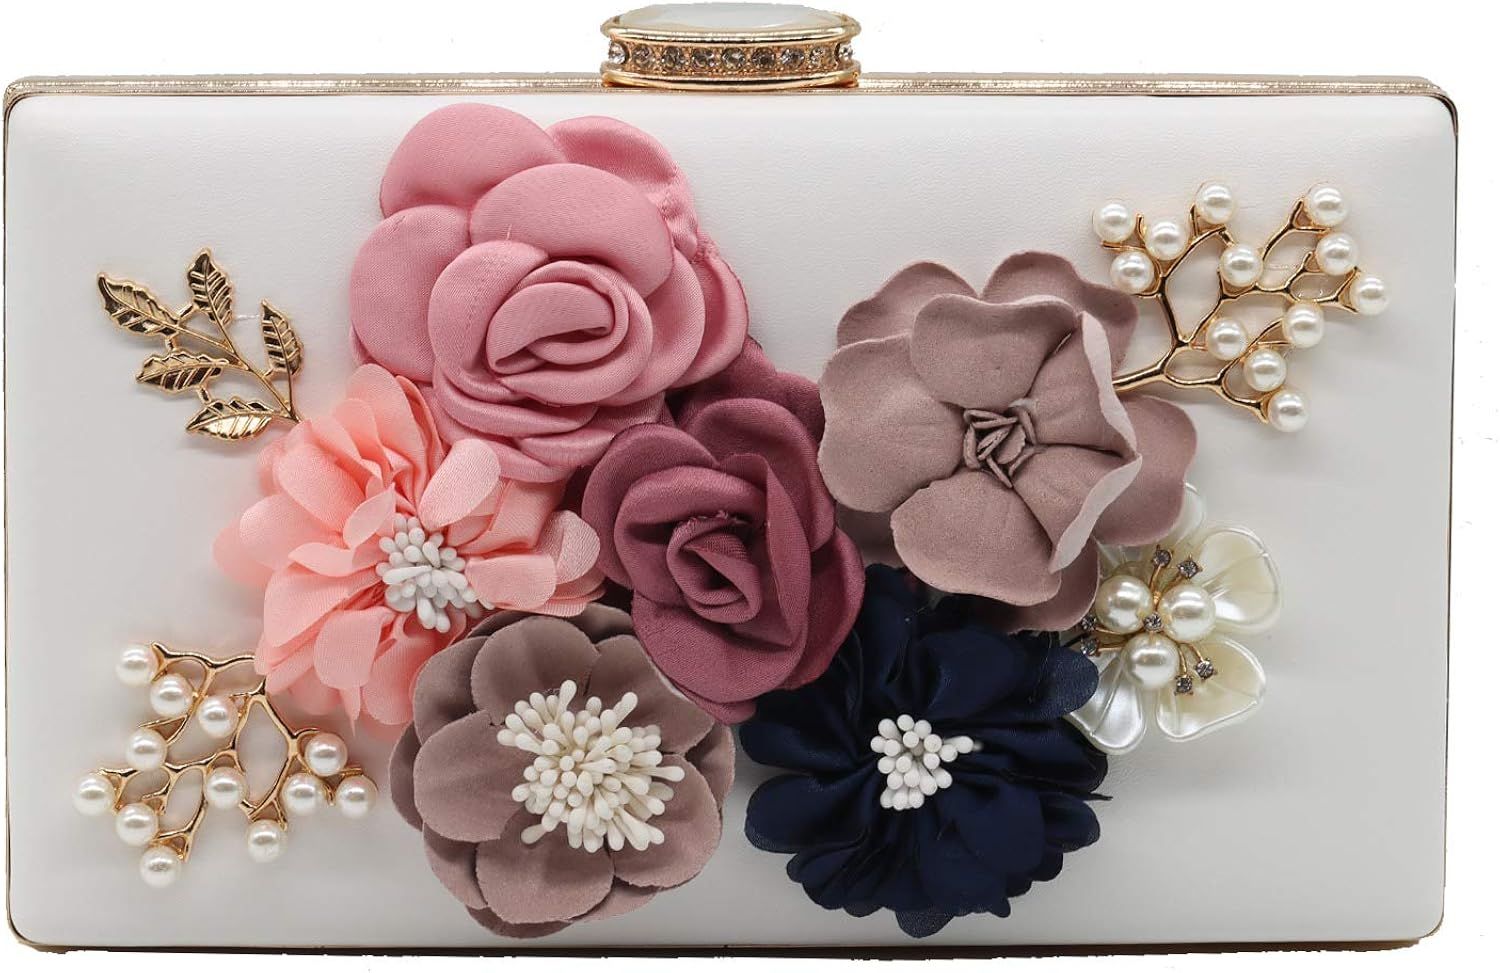 Amaze Flower Clutch Purse for Women Floral Evening Bags for Wedding Bride Formal Party | Amazon (US)